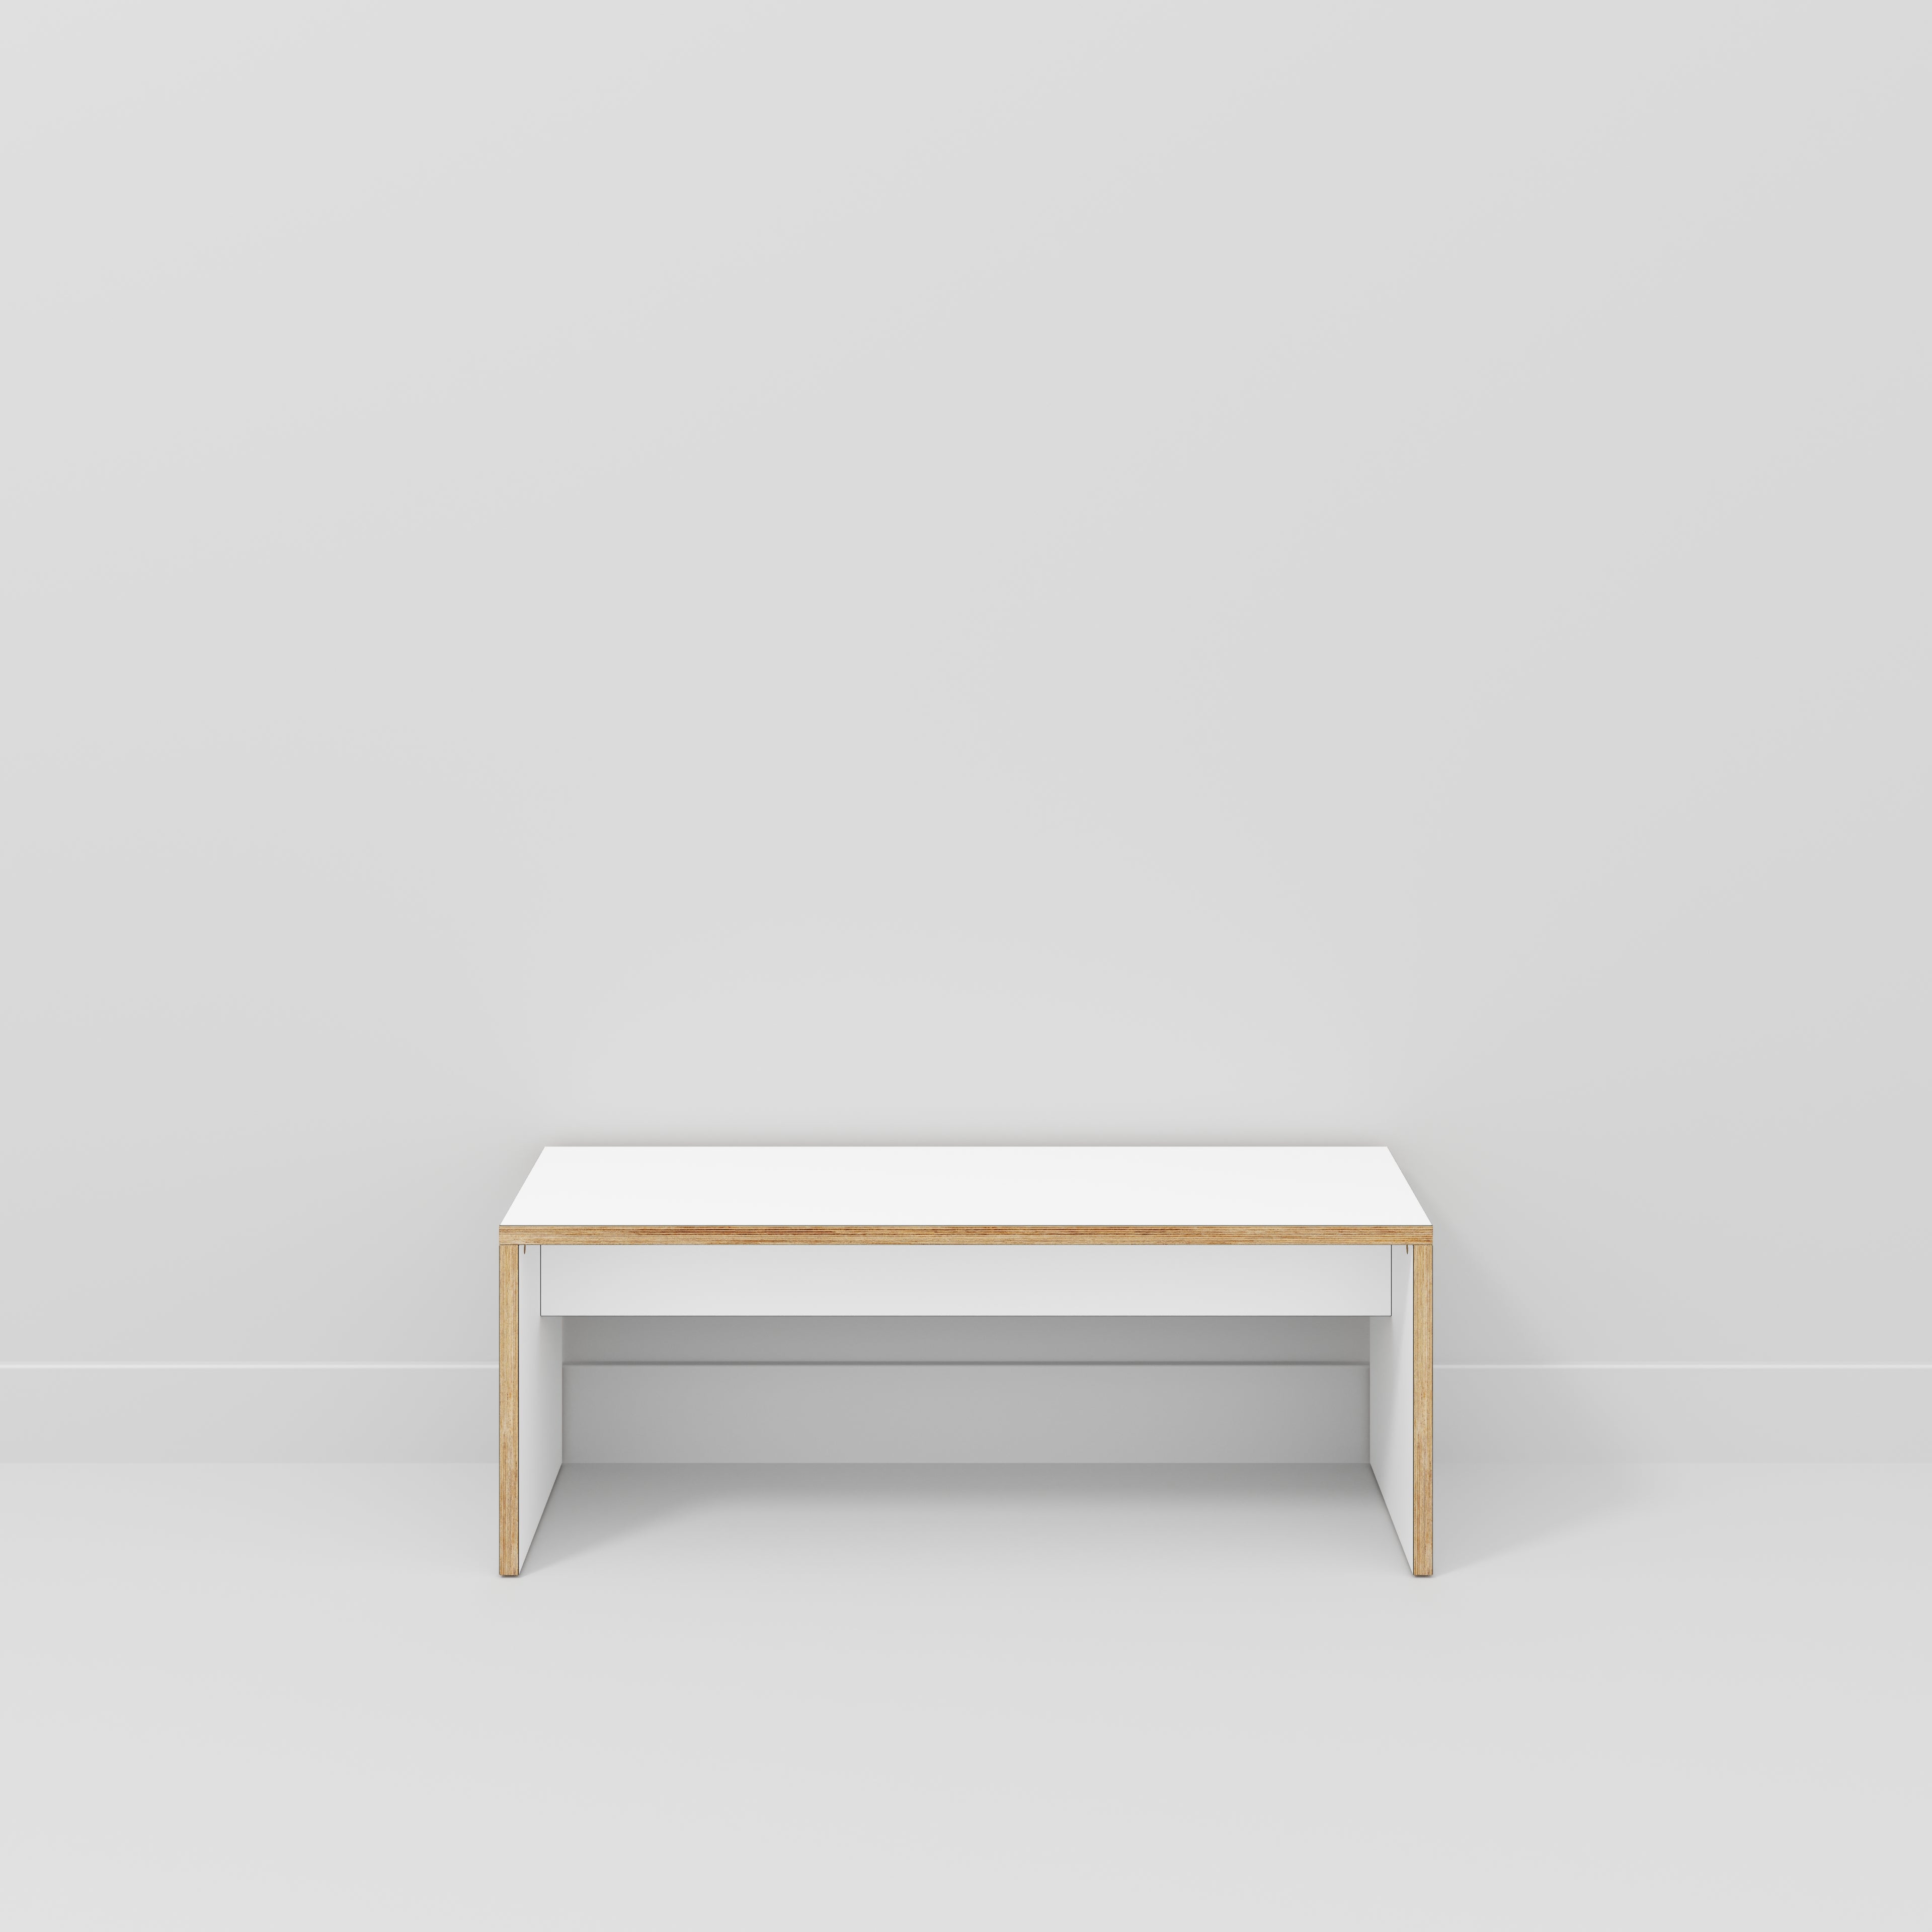 Bench Seat with Solid Sides - Formica White - 1200(w) x 400(d)